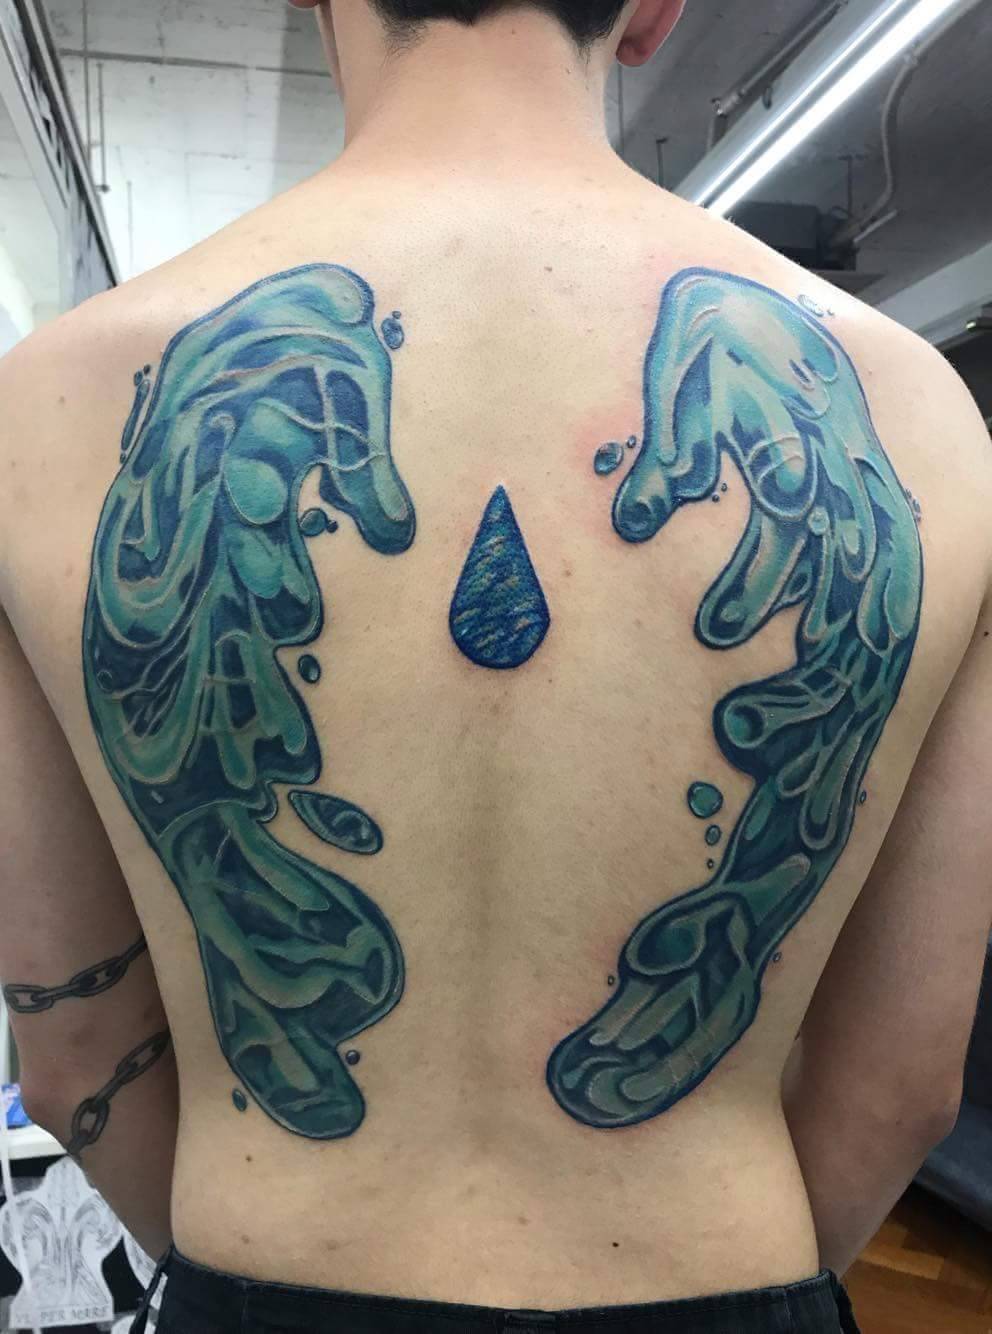 shadowblade58:The Amazing artist dement09 created this awesome lapis tattoo for me